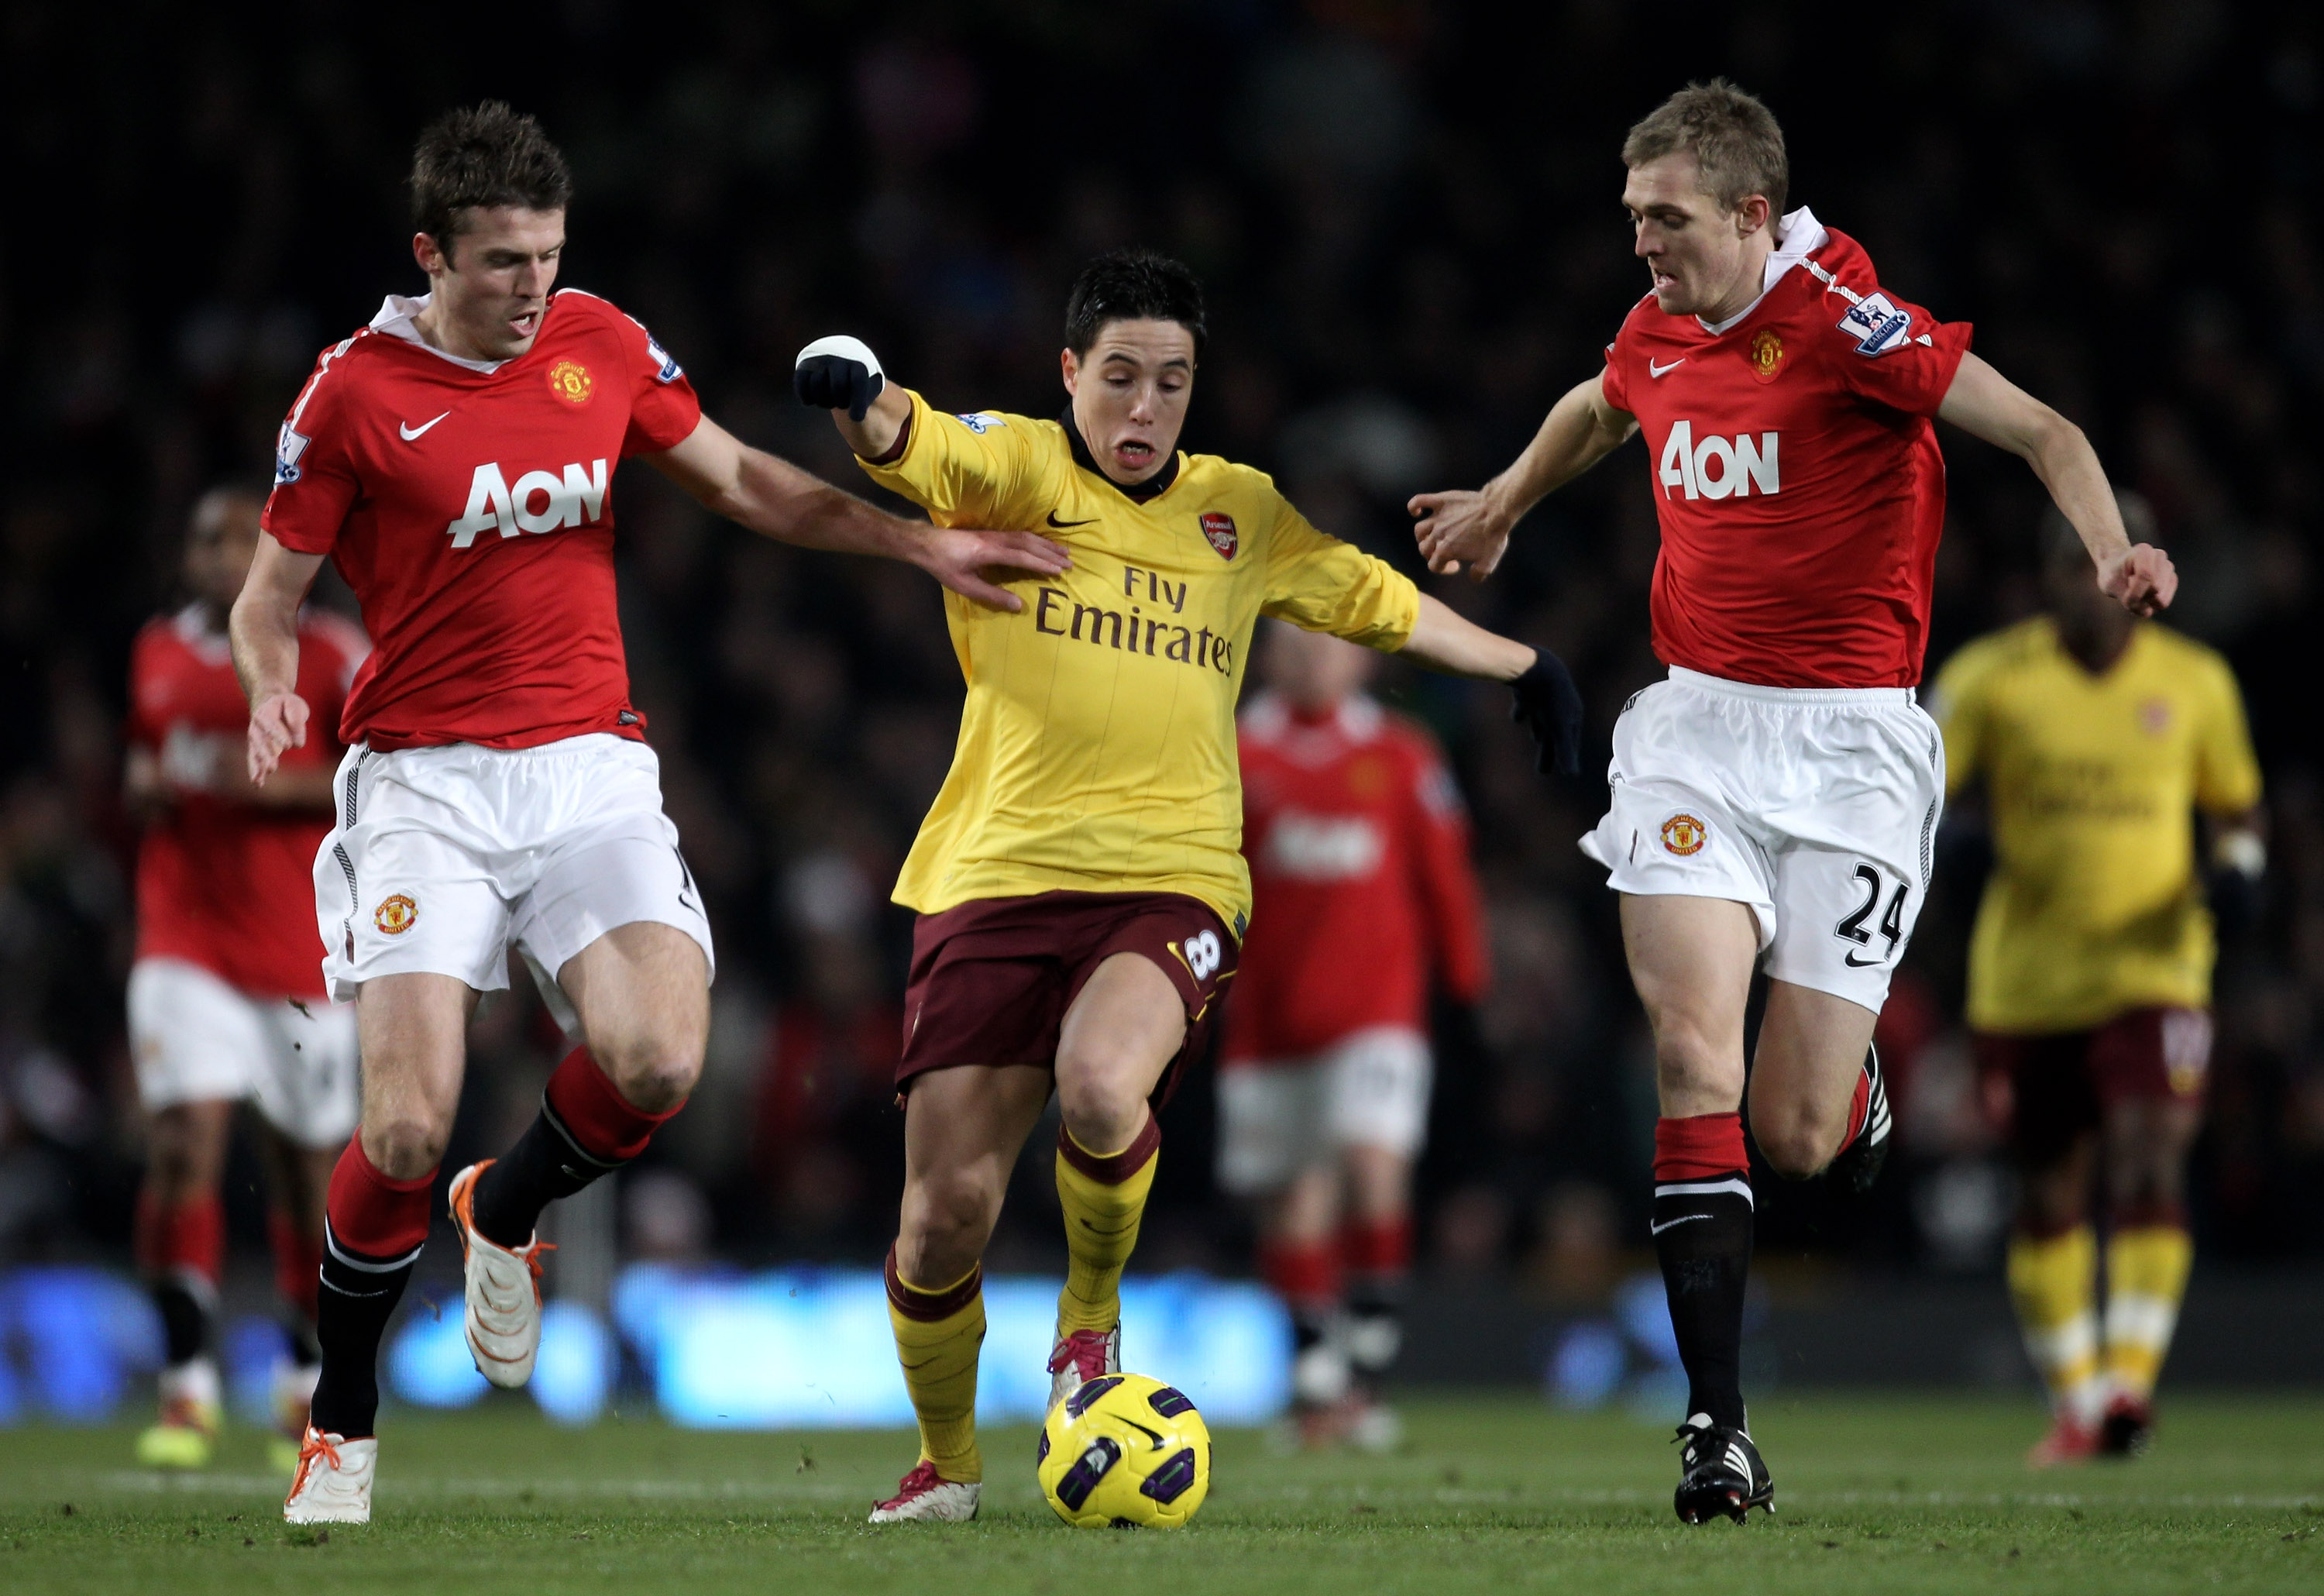 MANCHESTER, ENGLAND - DECEMBER 13:  Samir Nasri of Arsenal competes with Darren Fletcher (R) and Michael Carrick of Manchester United during the Barclays Premier League match between Manchester United and Arsenal at Old Trafford on December 13, 2010 in Ma